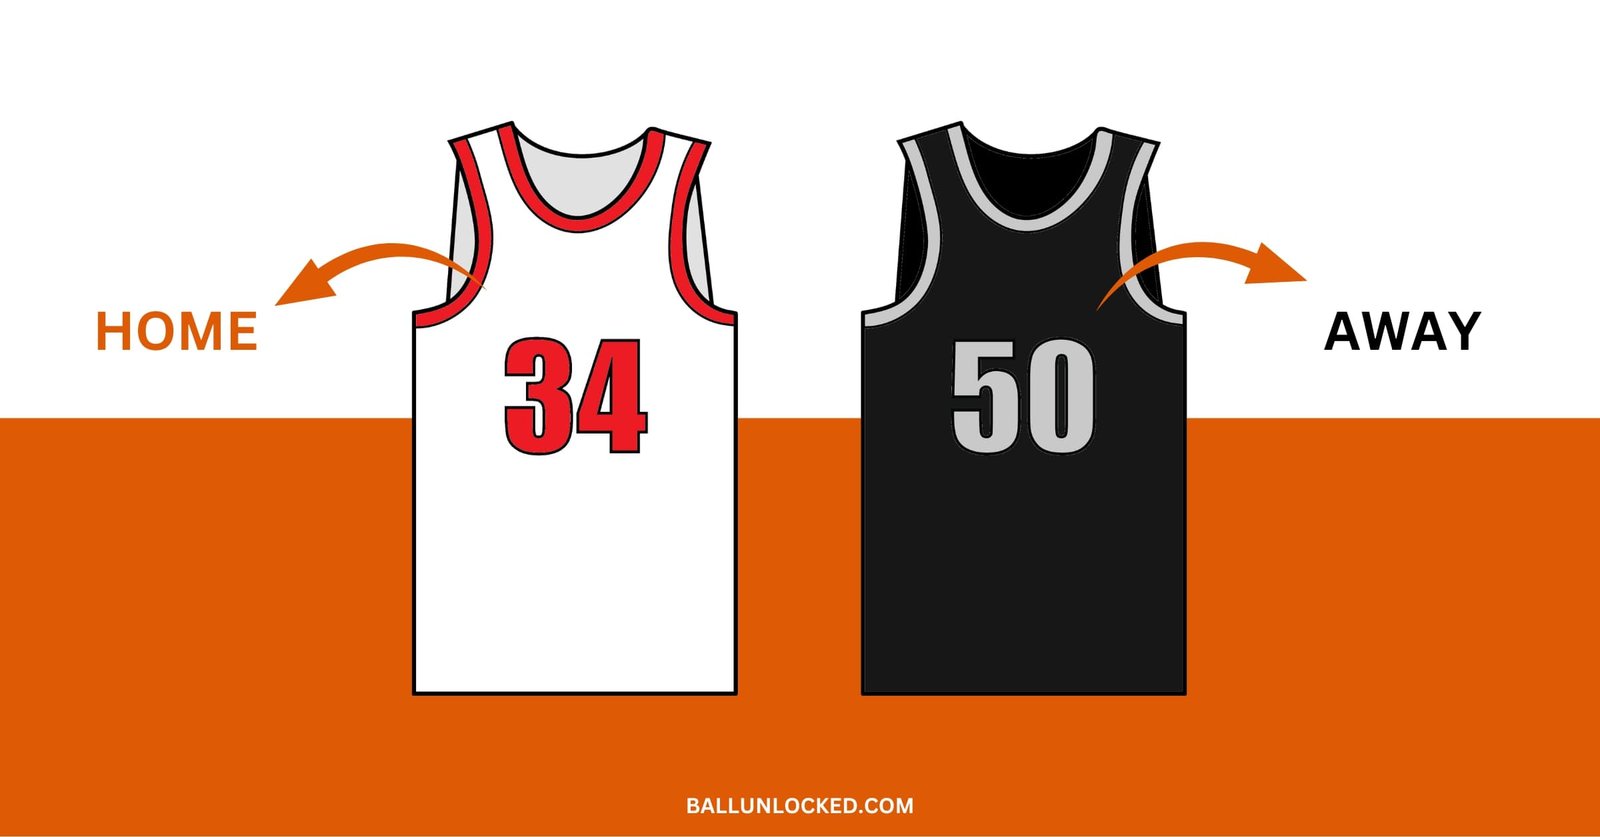 Why Do NBA Players Tuck In Their Jerseys? - Ball Unlocked